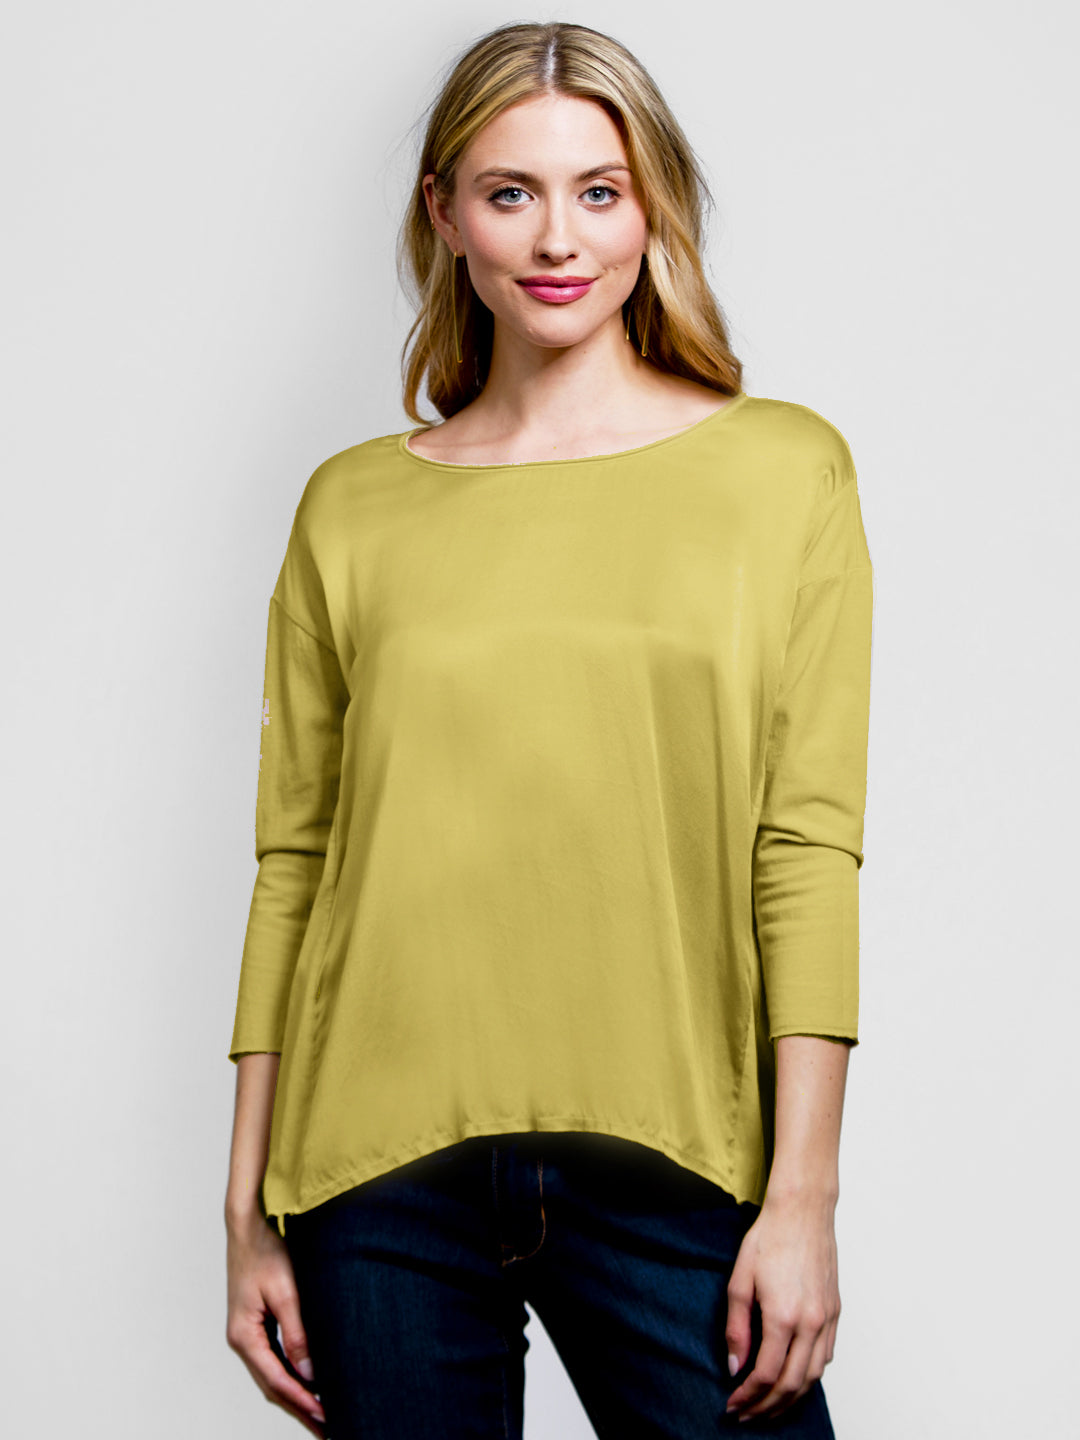 ICONIC go all ways top - Machine washable easy fit pull over silk woven front and knit sleeve top with roll knit finishing detail at neckline. It features a raw edge sleeve finishing and is our best-selling “ICONIC” style. 